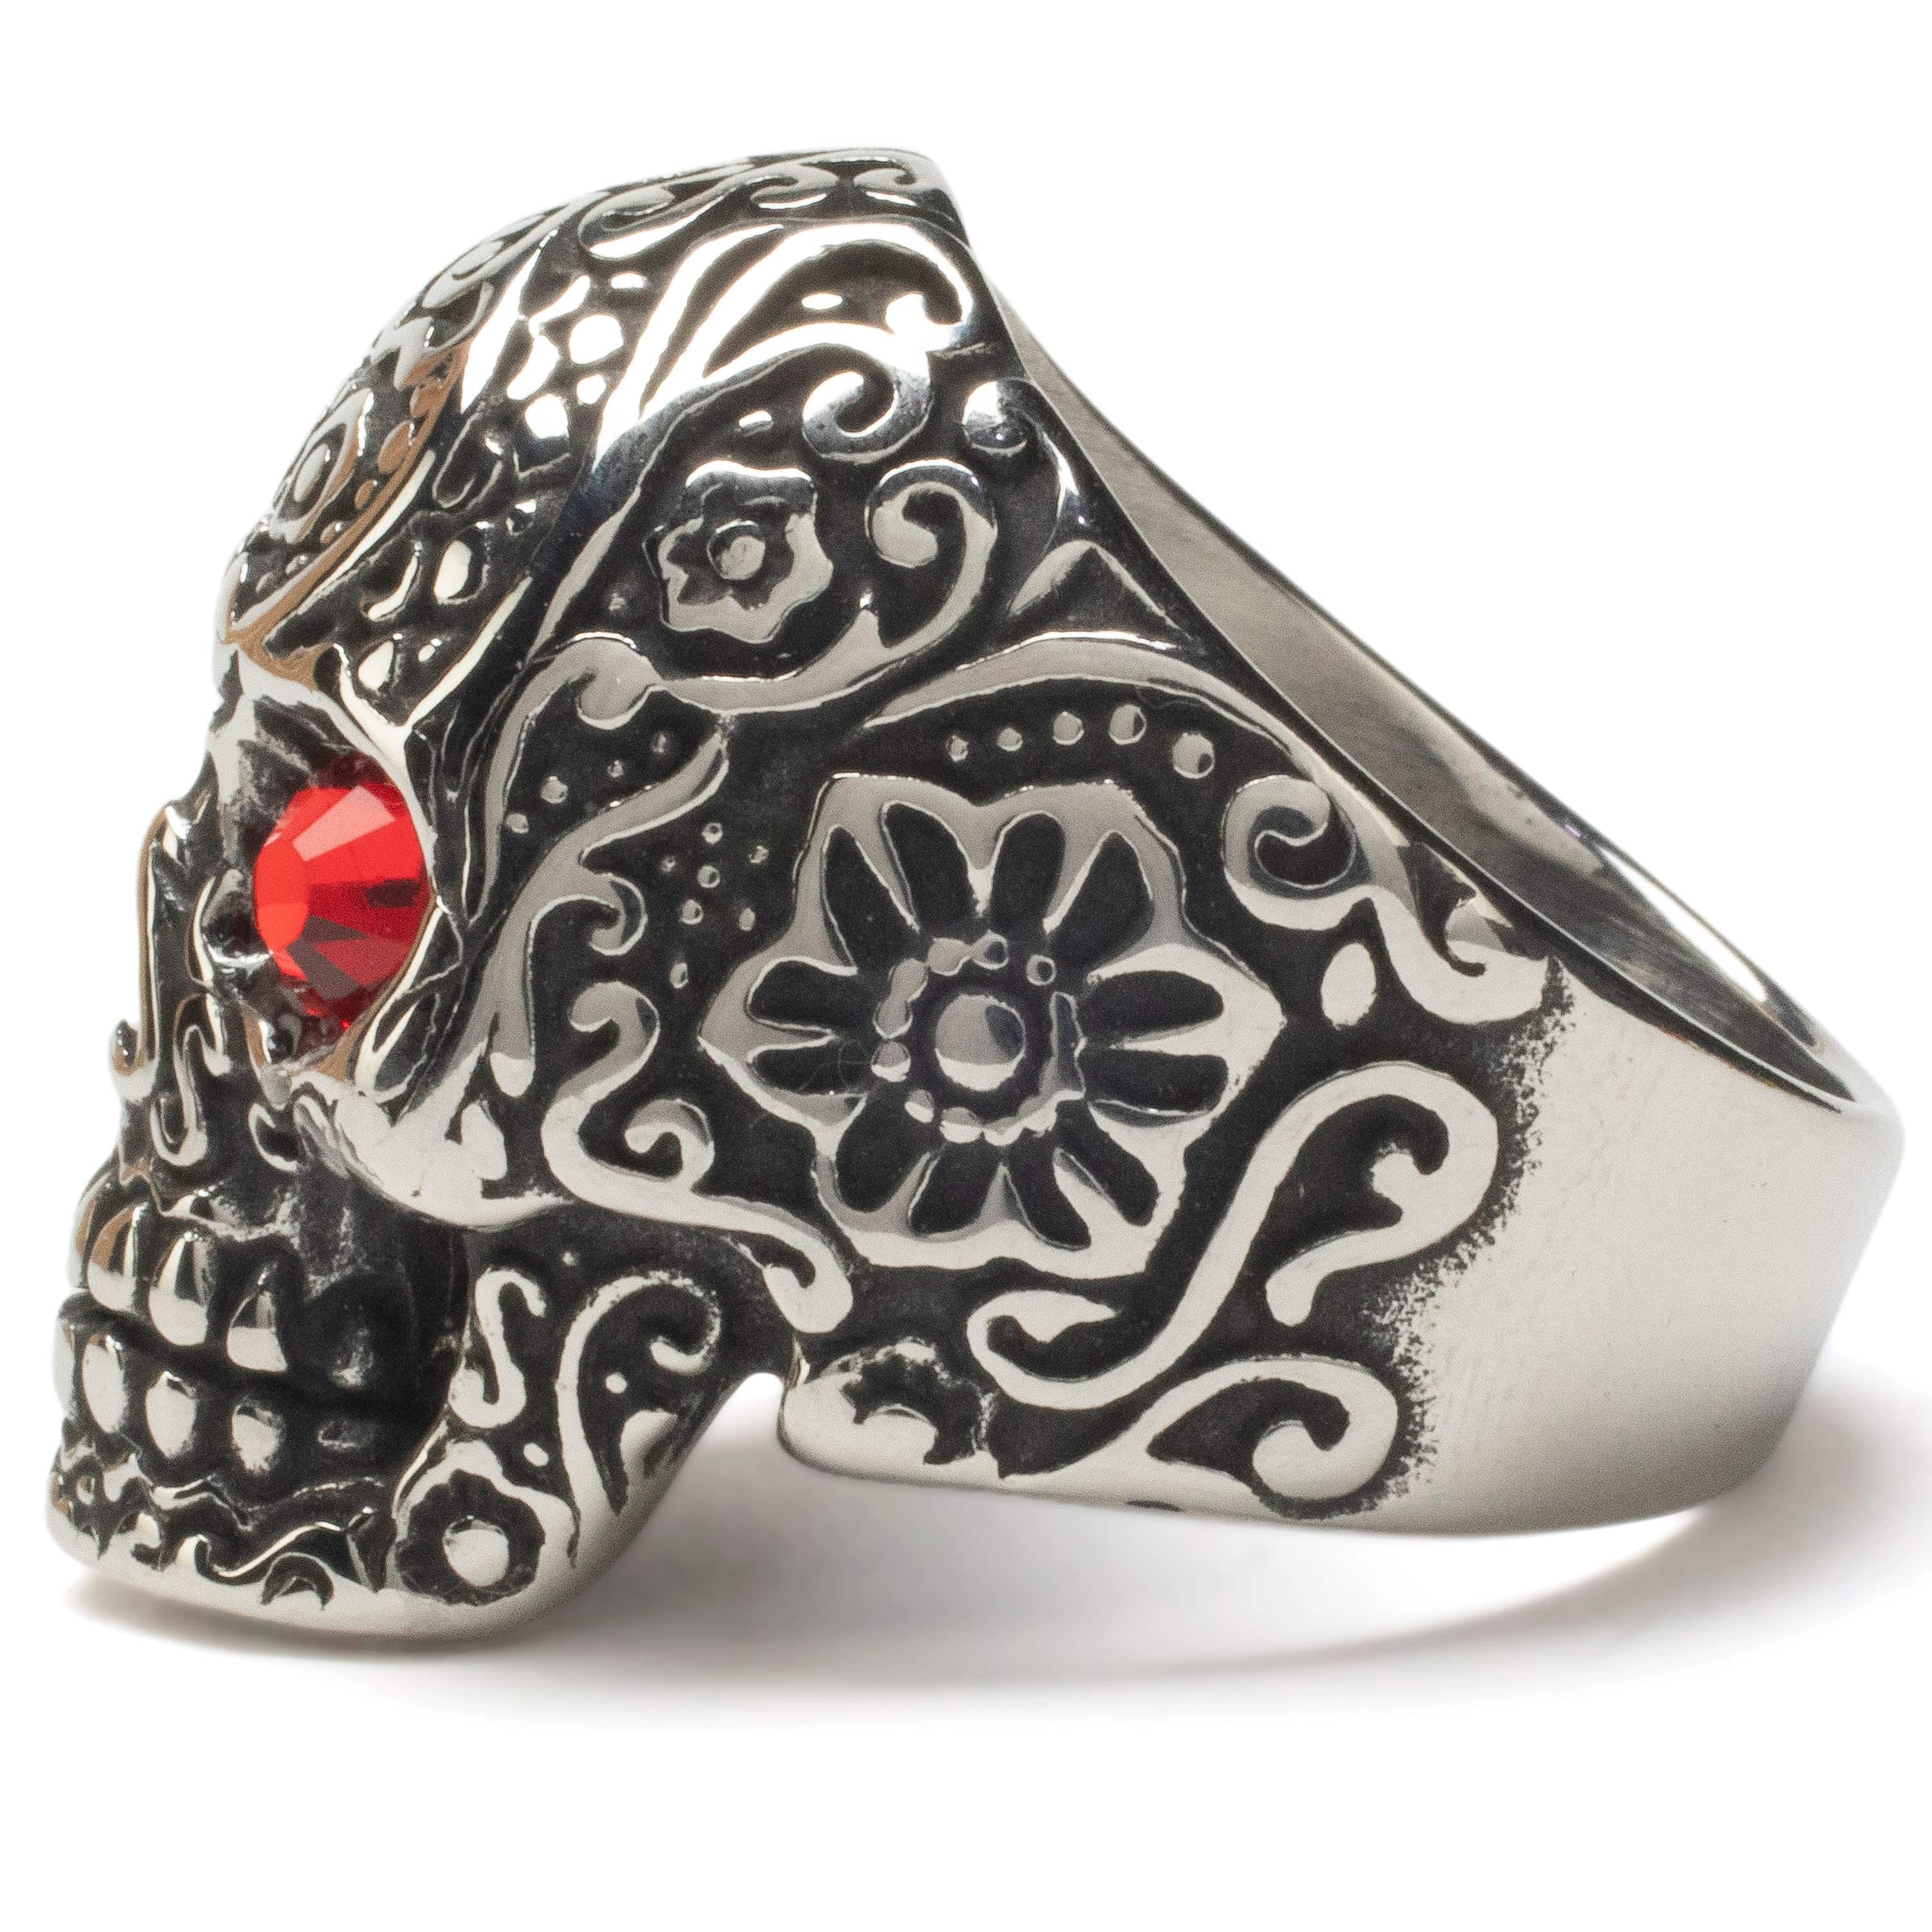 Kalifano Native American Jewelry Steel Hearts Ornate Skull with Red Gemstone Eyes Stainless Steel Ring